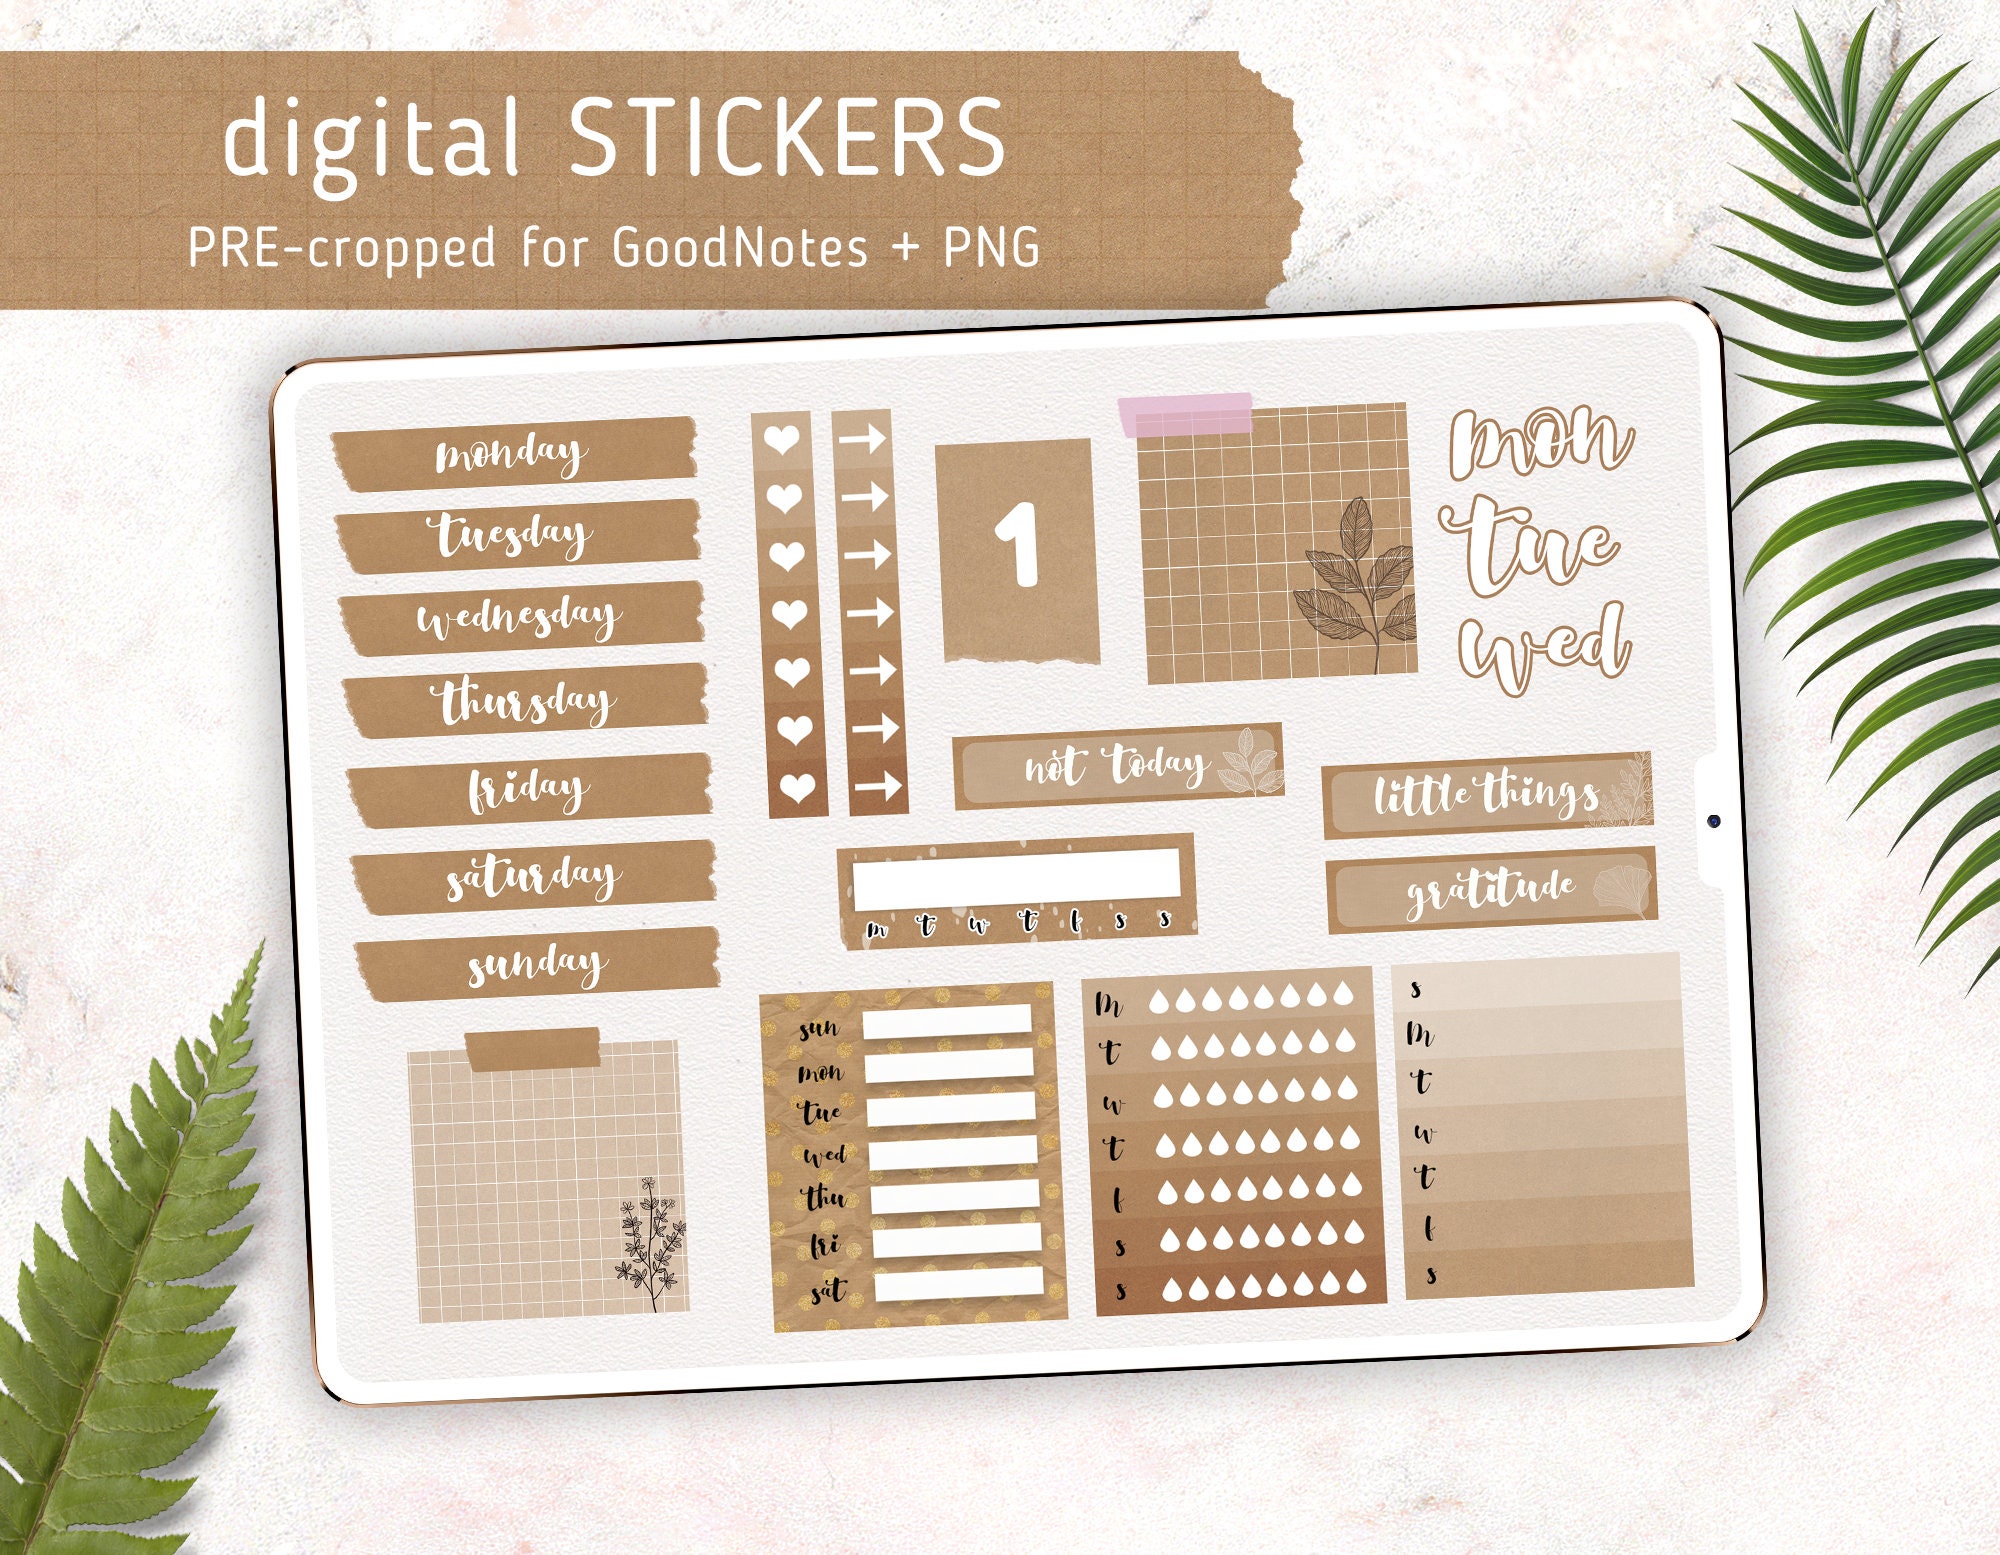 Digital Stickers Nude Stickers Goodnotes Stickers Pre-cropped Stickers  Digital Planner Stickers -  Israel